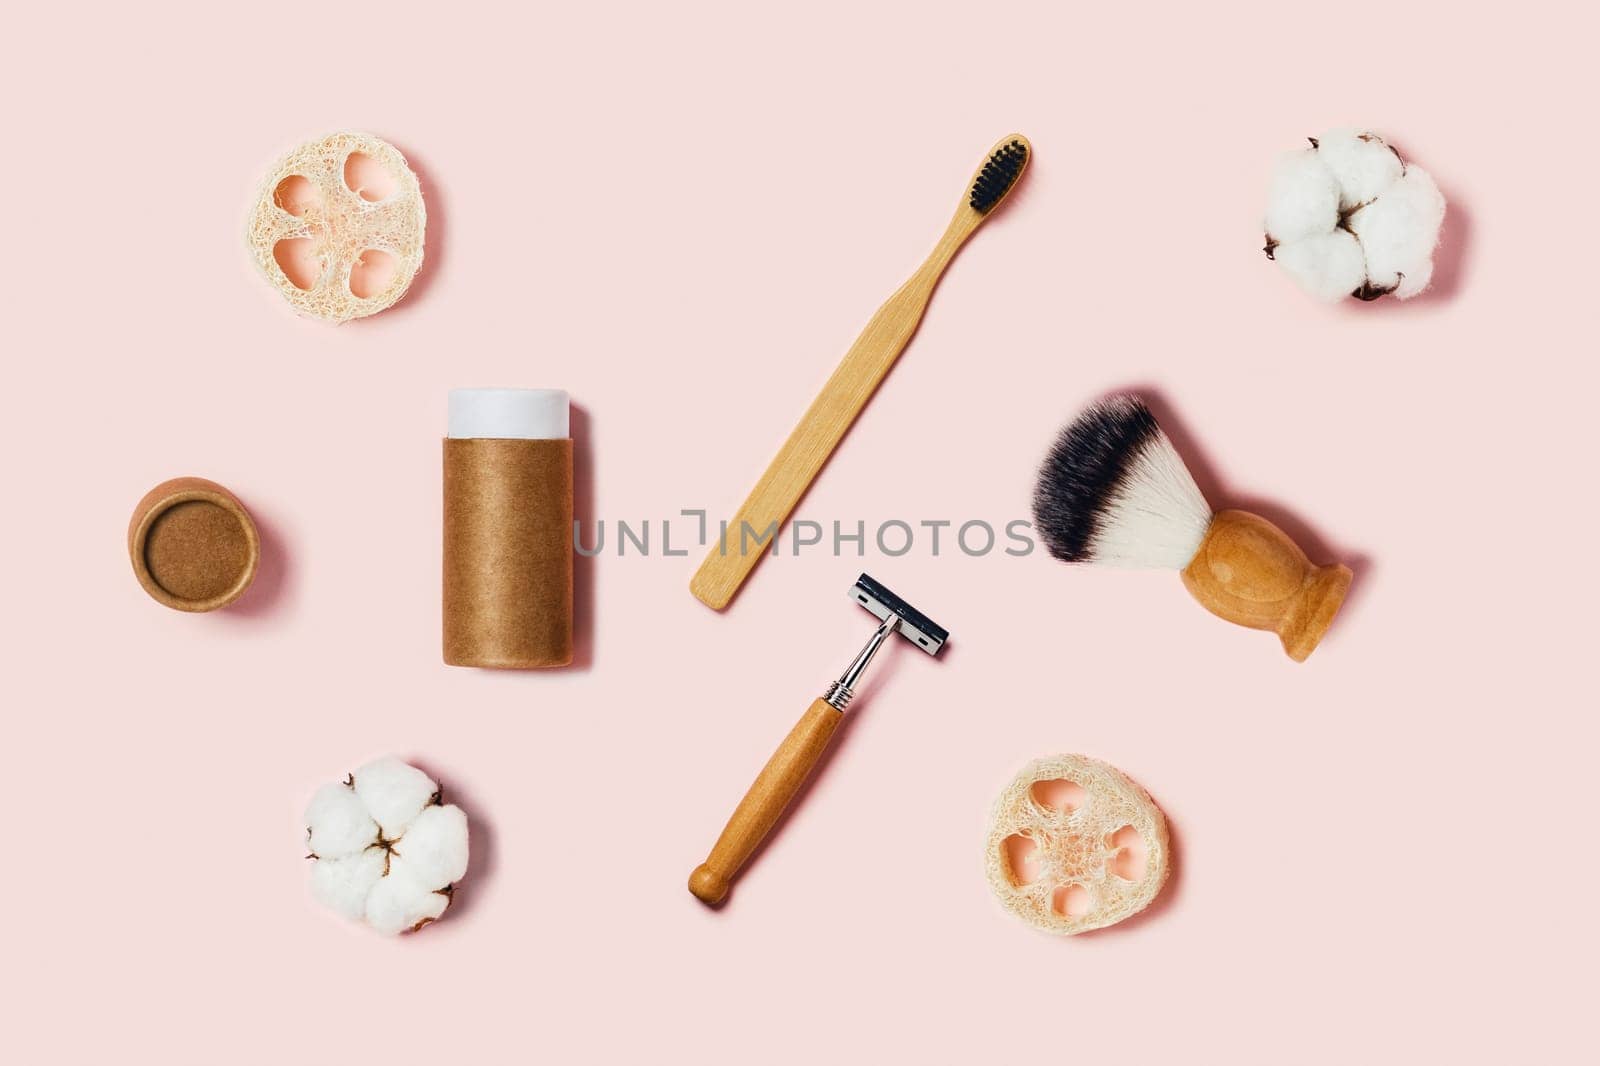 Bathroom accessories on pink background. Natural bamboo toothbrush, sponges, cotton flowers, shaving brush. Flat lay, top view.